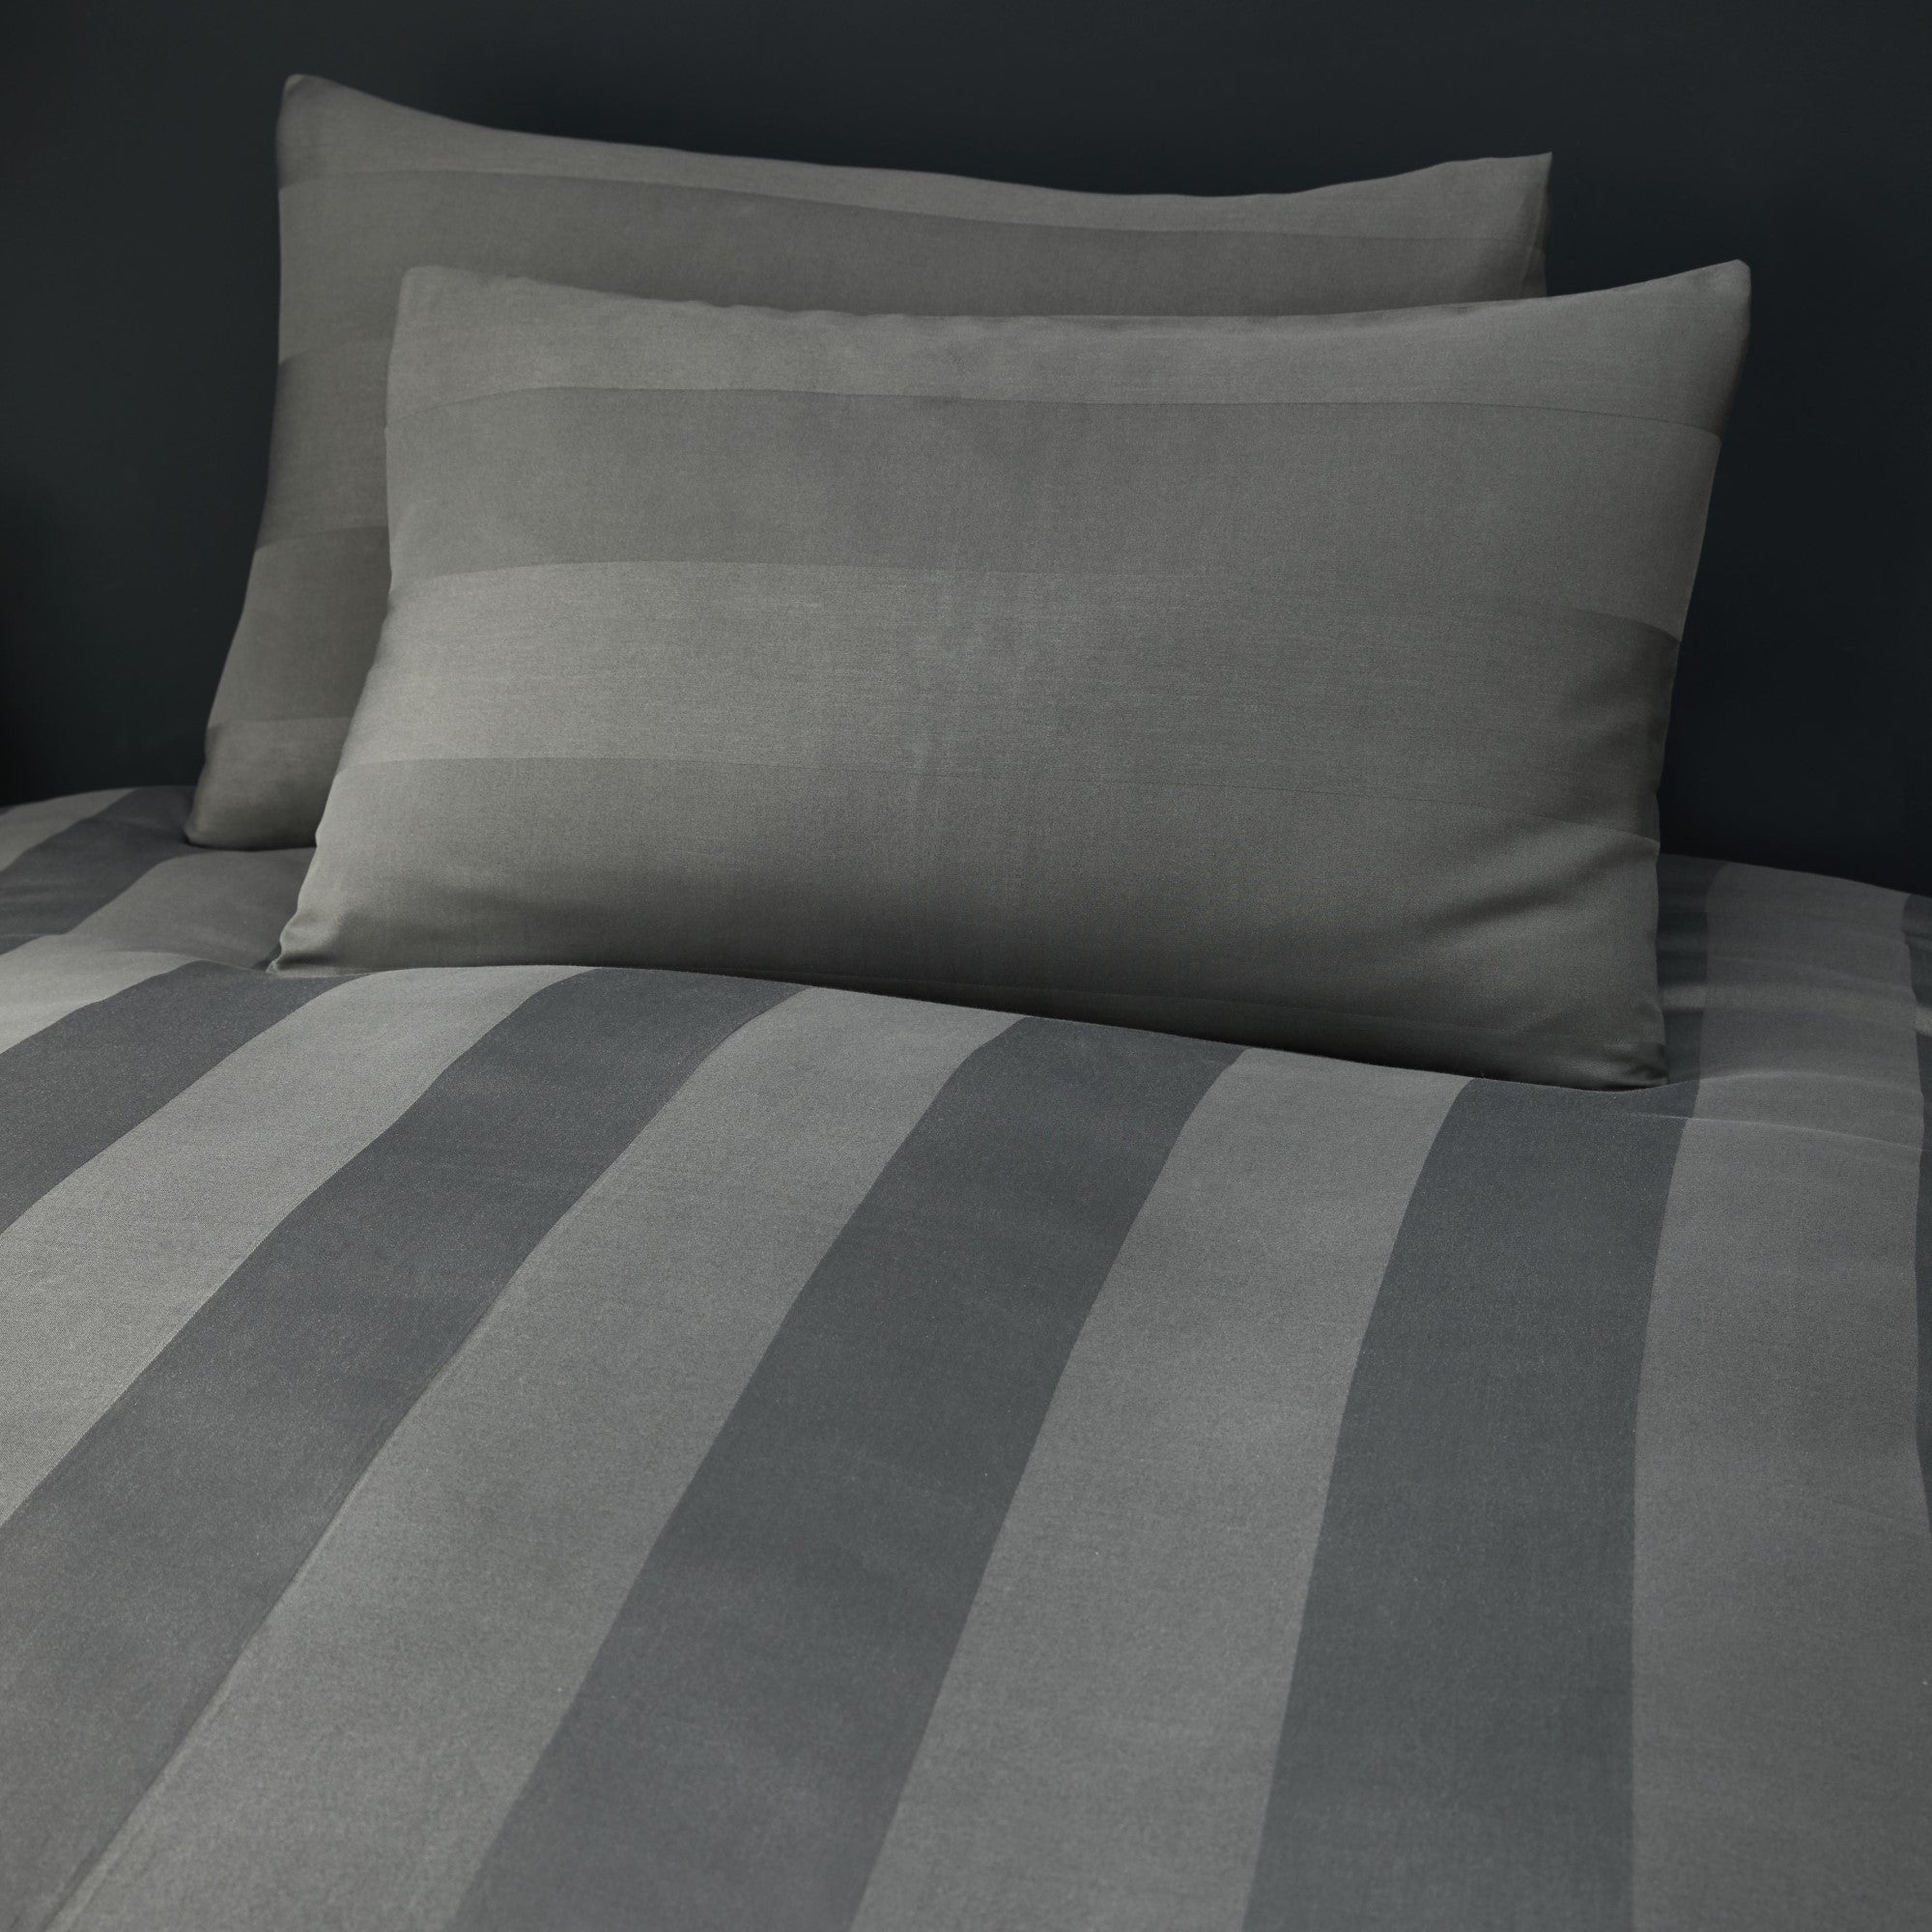 Duvet Cover Set Capri by Appletree Boutique in Charcoal